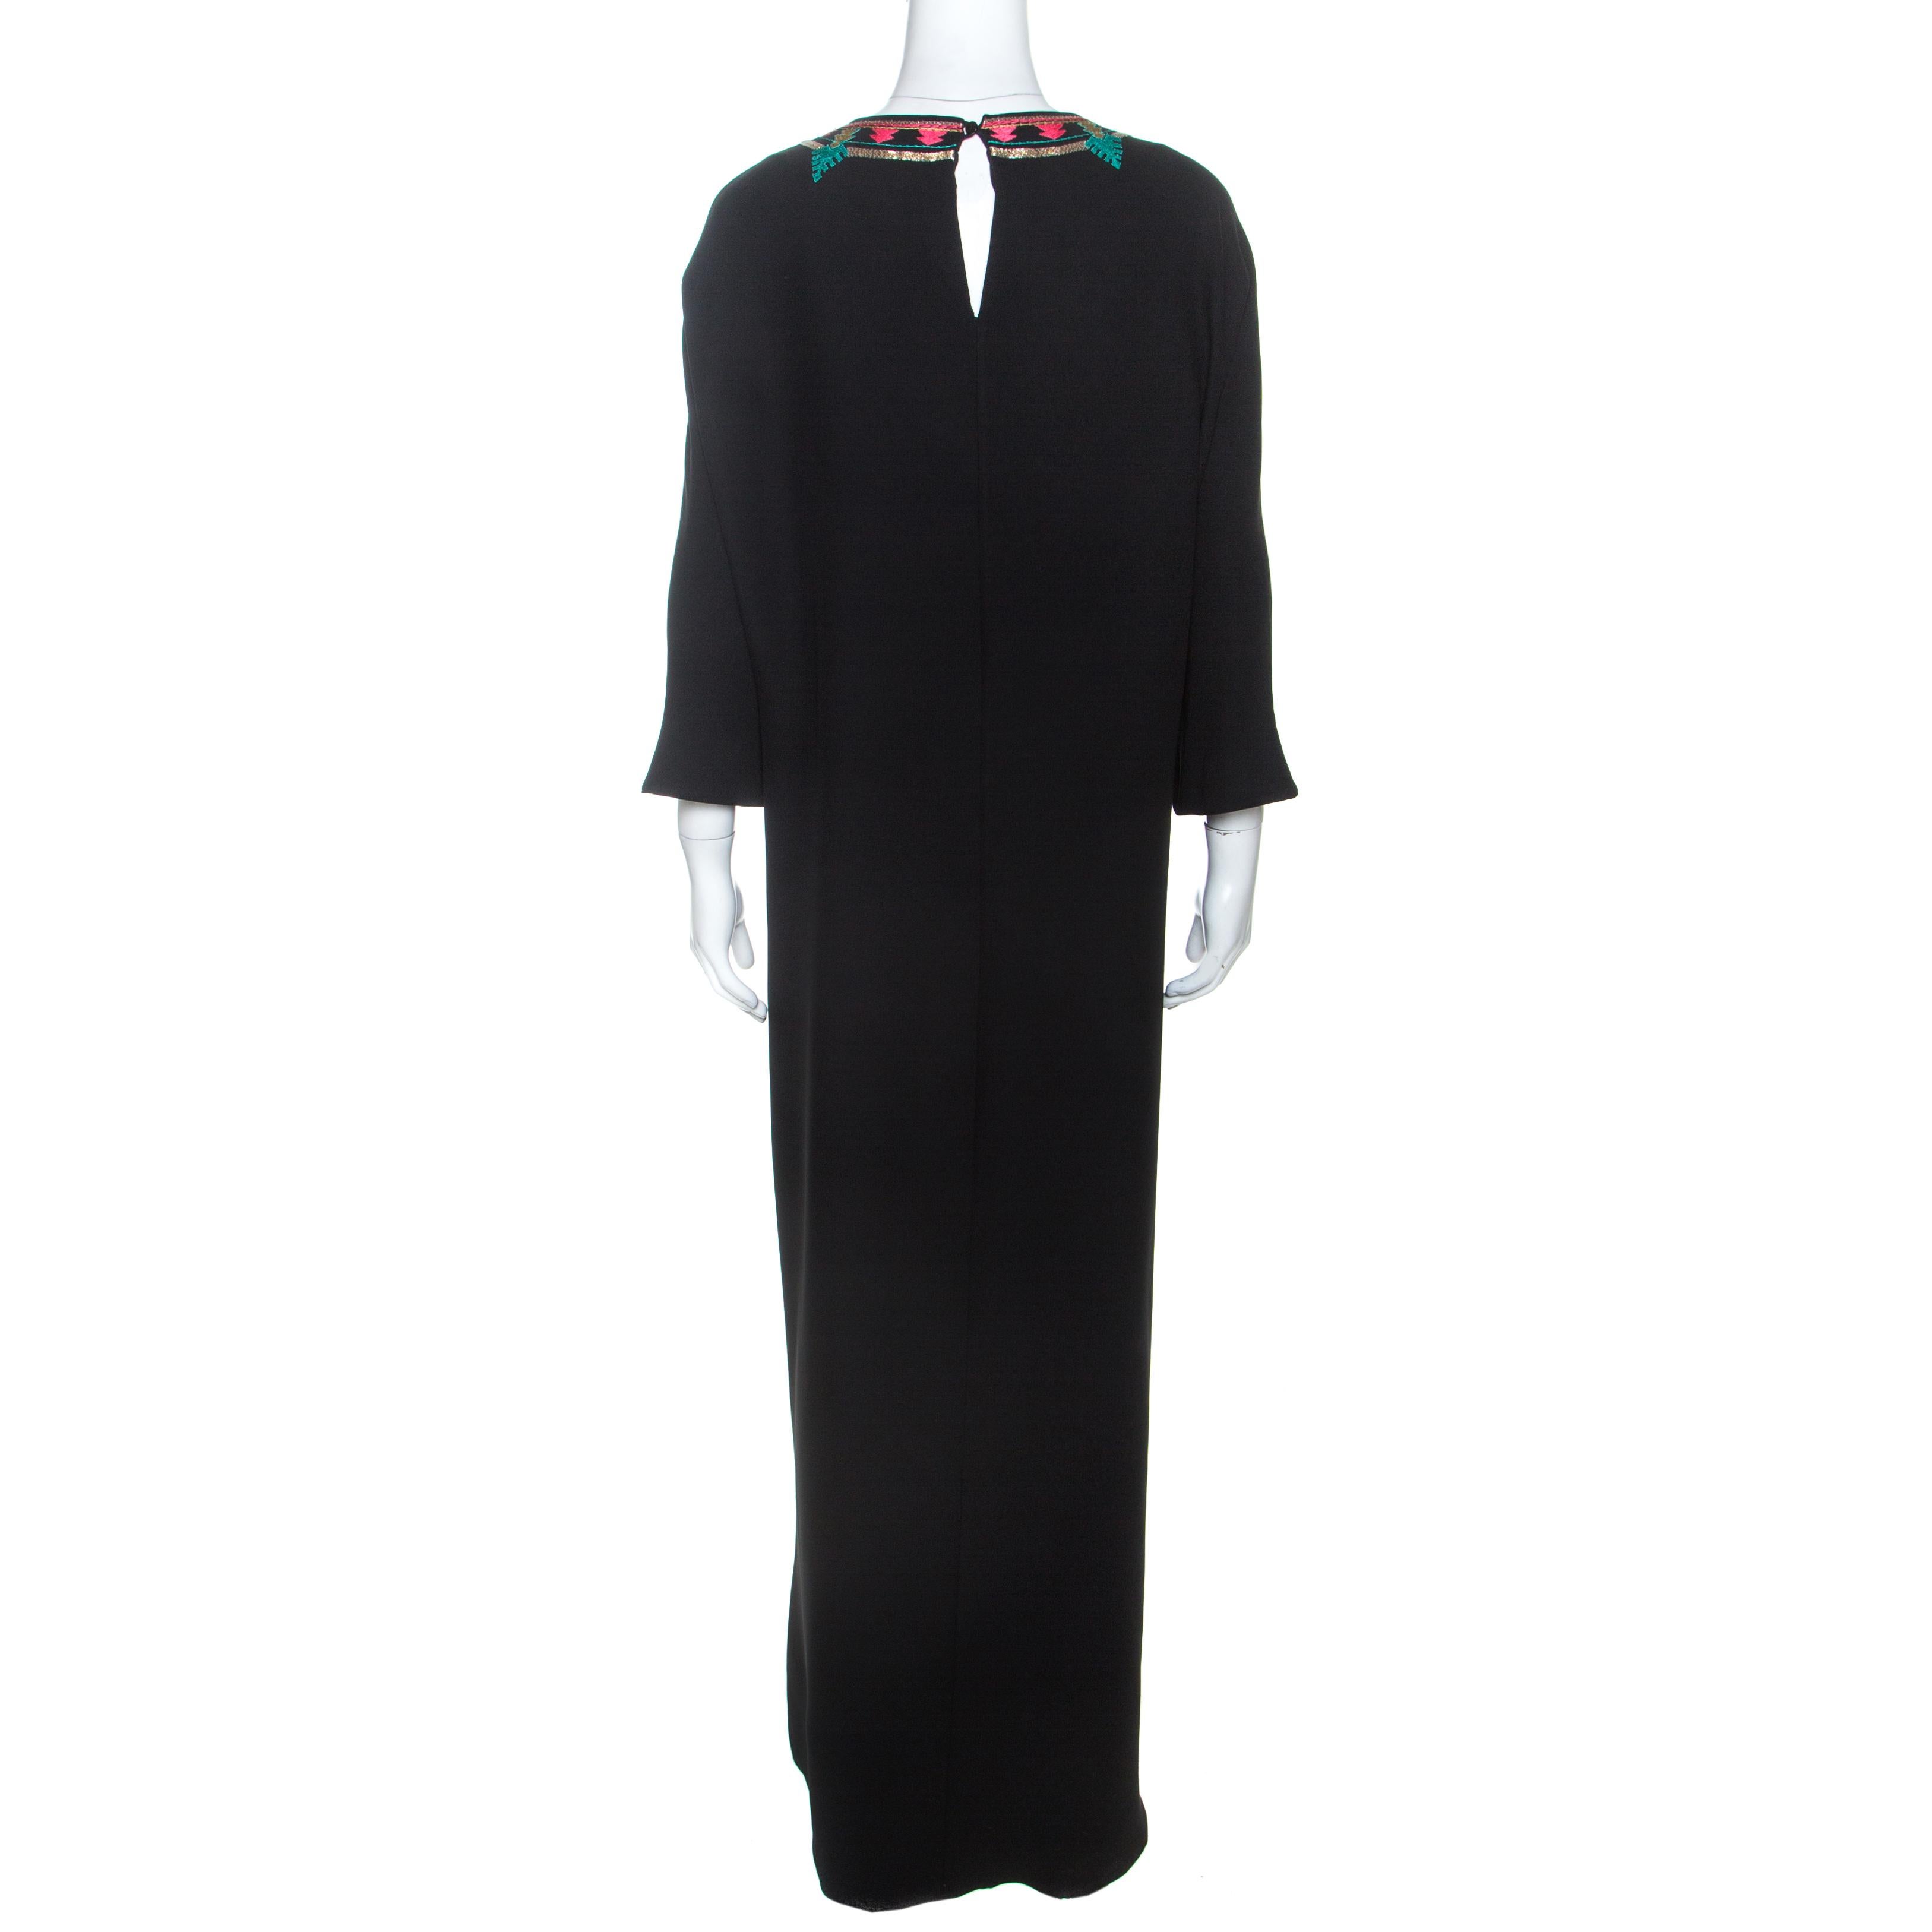 This gorgeous maxi dress from the house of Valentino is one of a kind. Crafted from 100% silk, this luxurious creation comes in a classy shade of black. It features a simple silhouette with a round neck beautified with multicolored embroidery, small